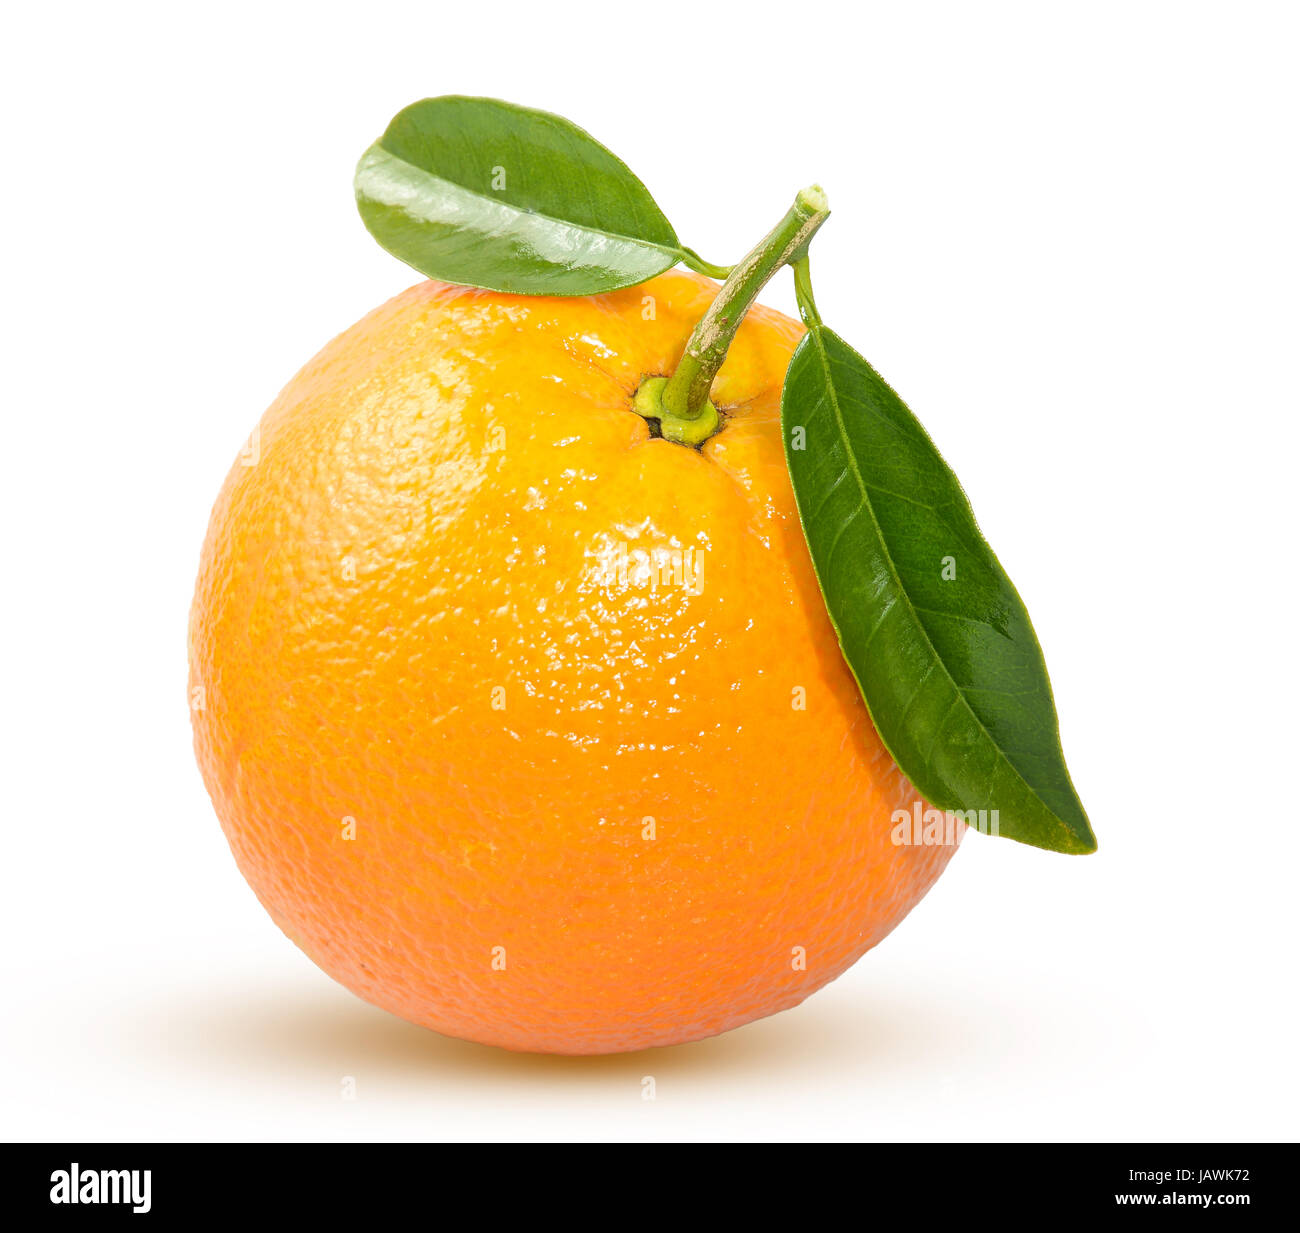 ripe orange with a green leaf on a white background Stock Photo